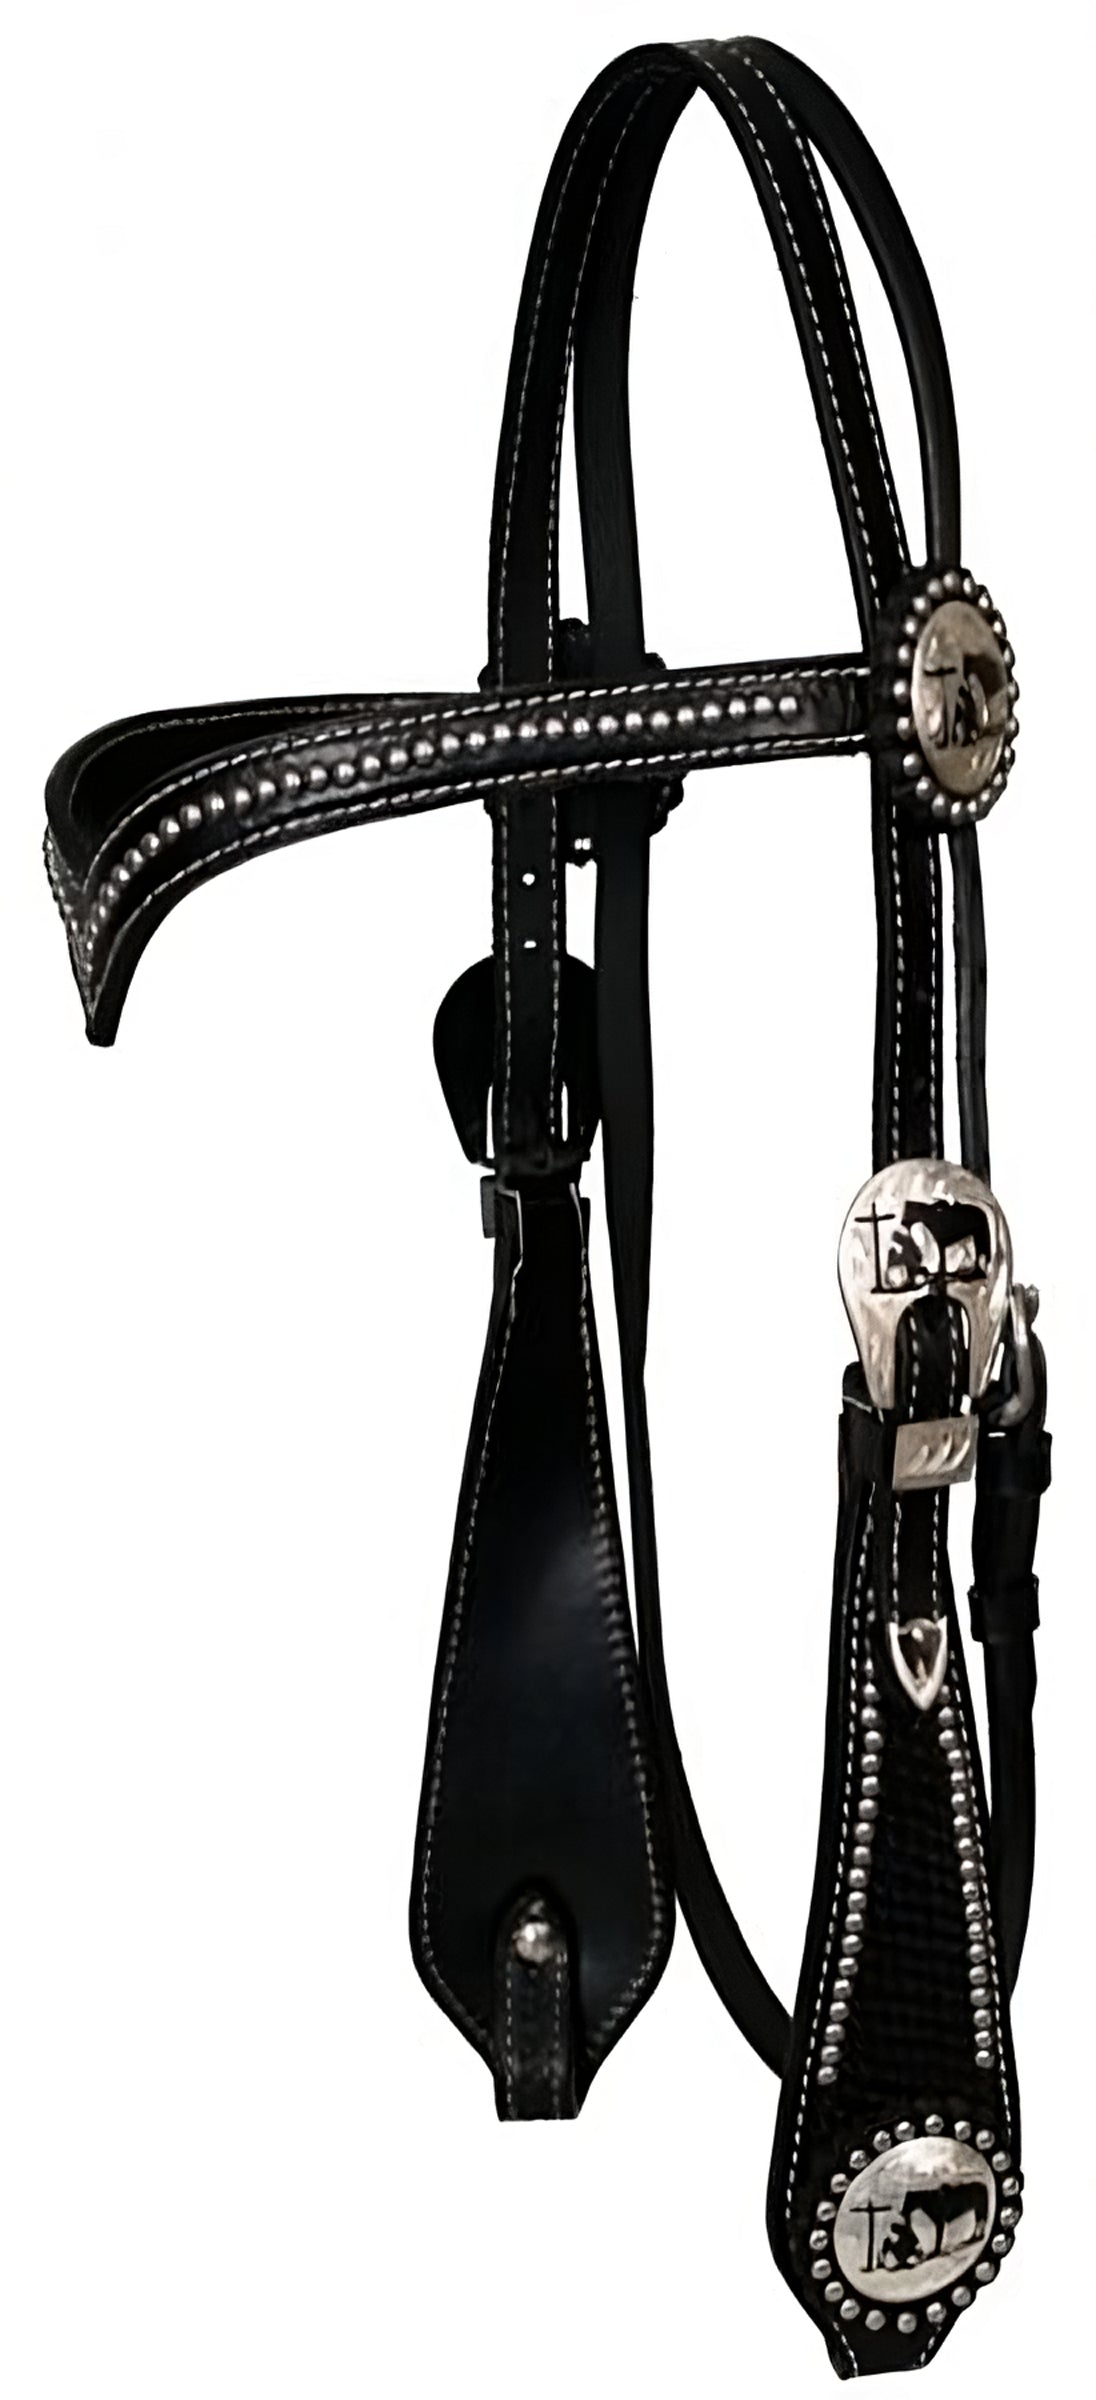 12644: Showman ® double stitched leather silver beaded v brow headstall Headstall Showman